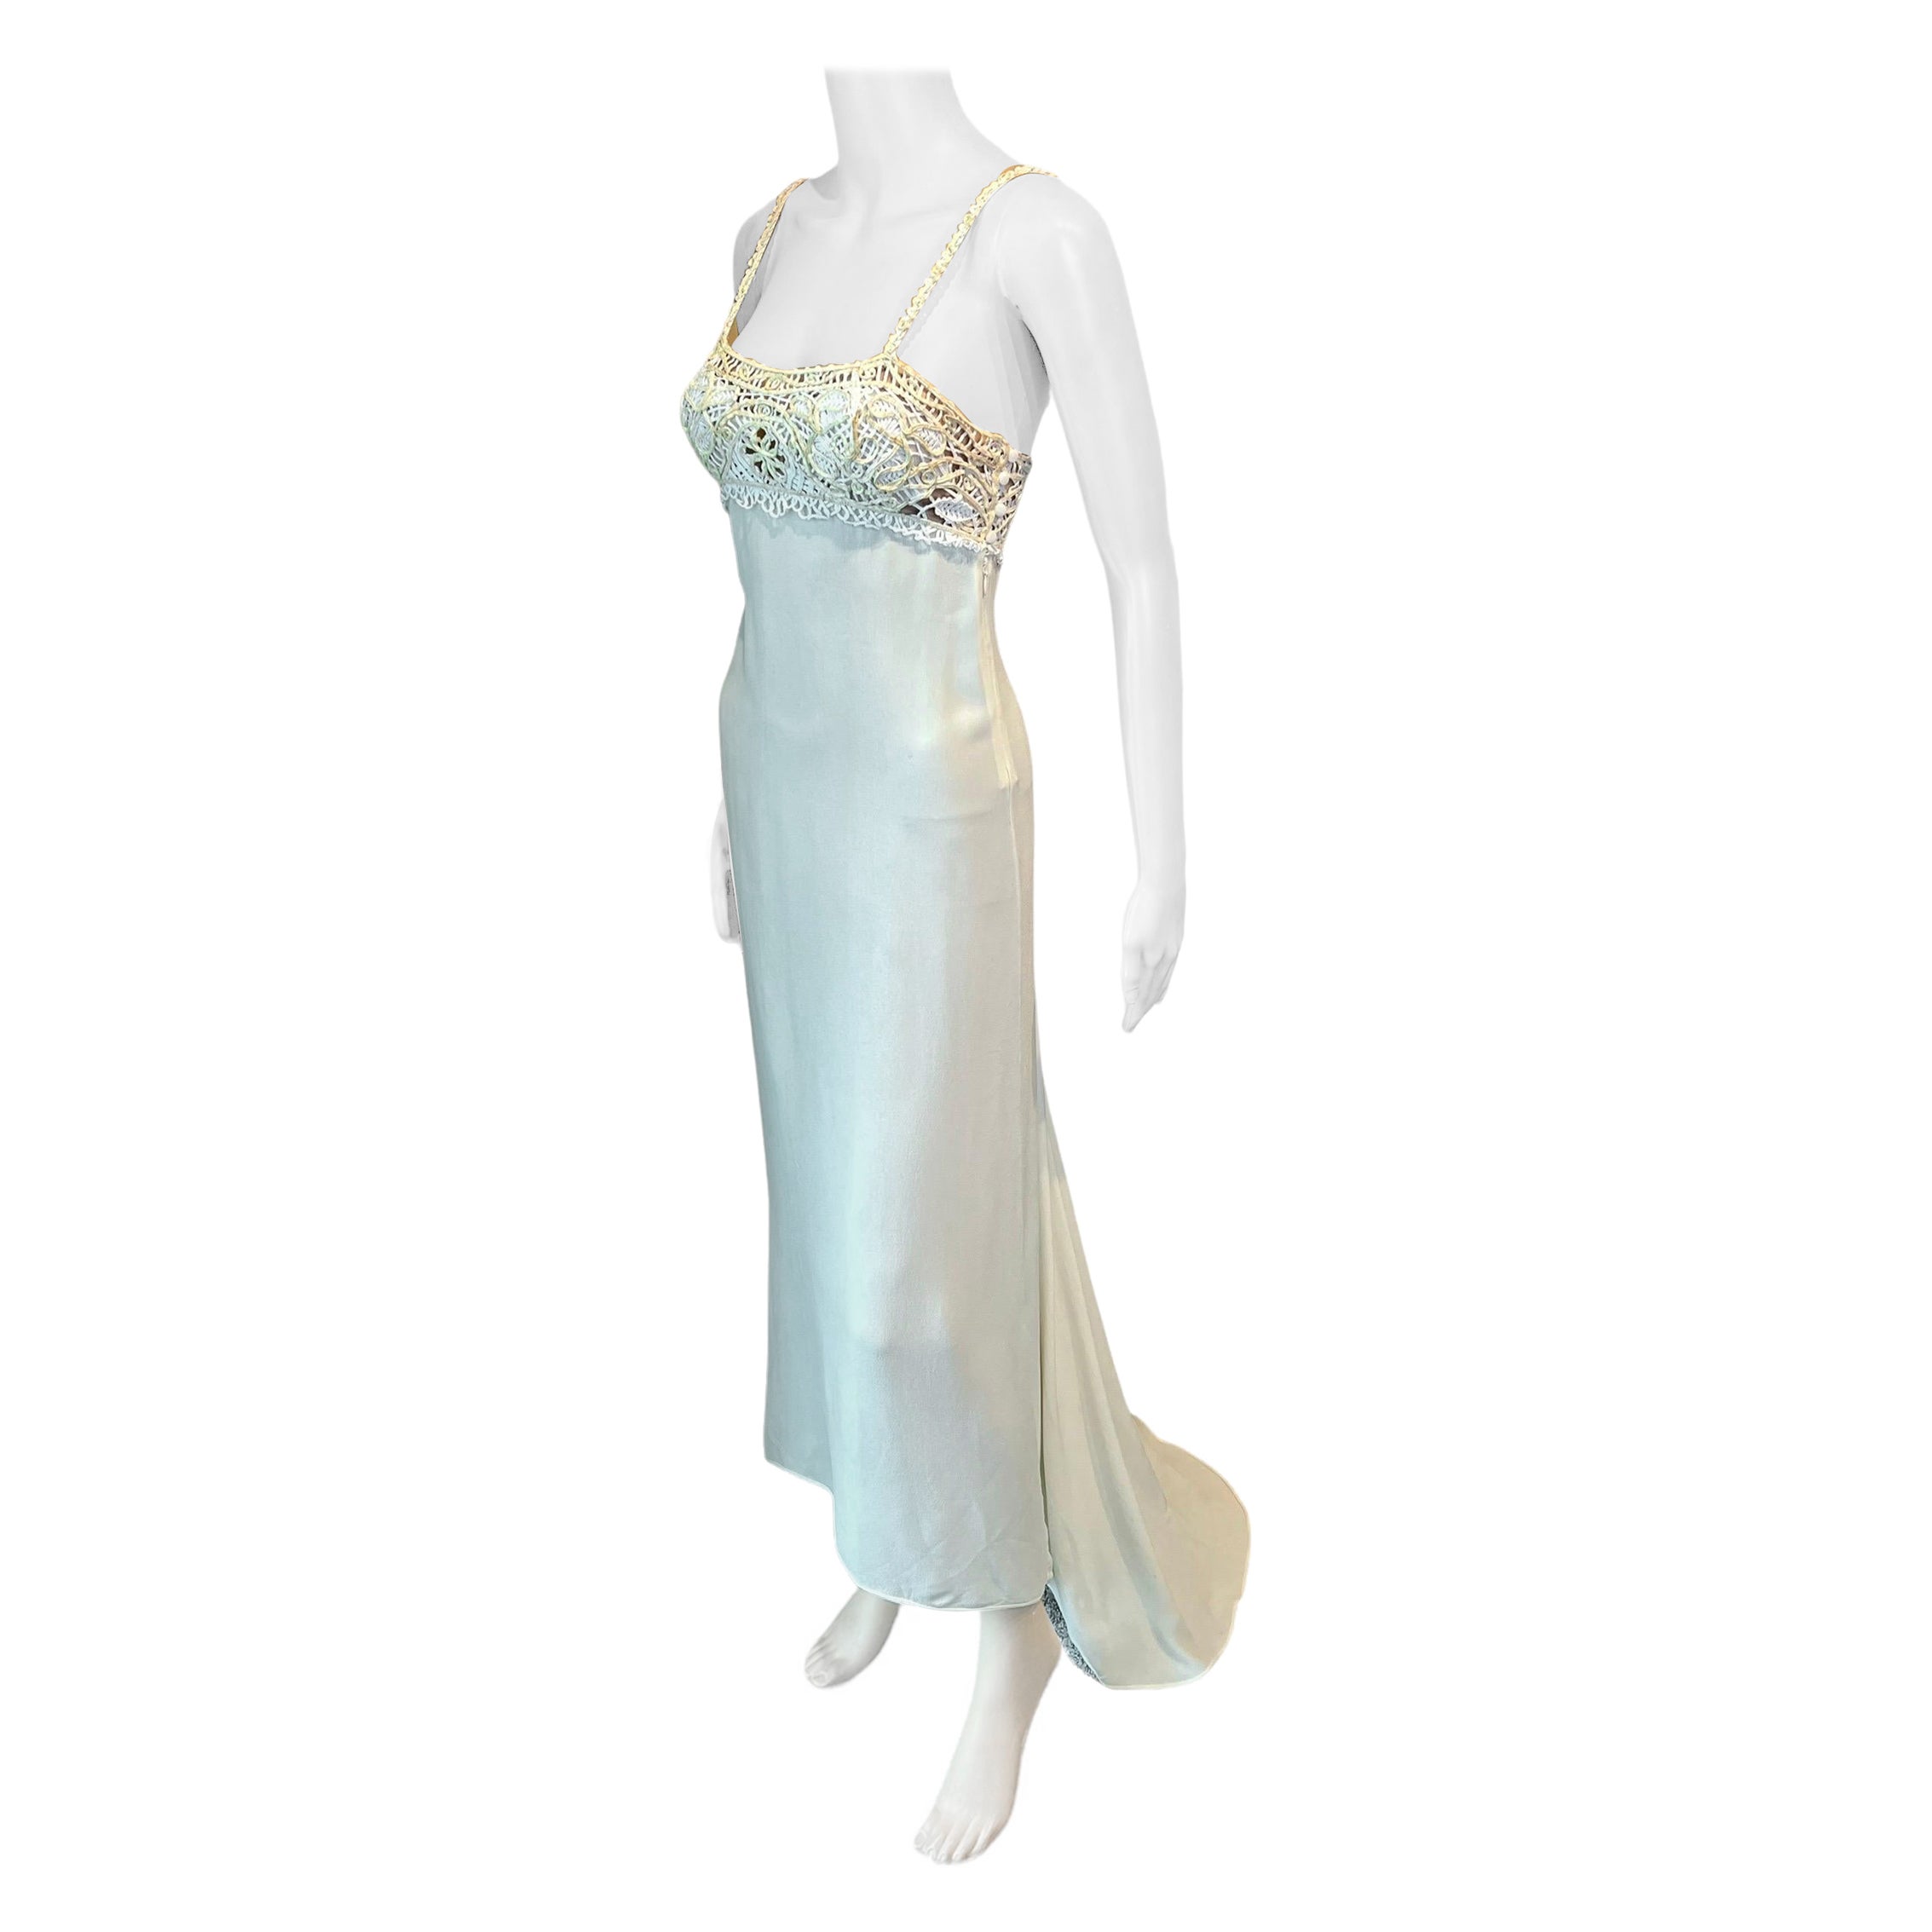 Gianni Versace S/S 1997 Runway Embroidered Lace Ivory Evening Dress Gown  For Sale